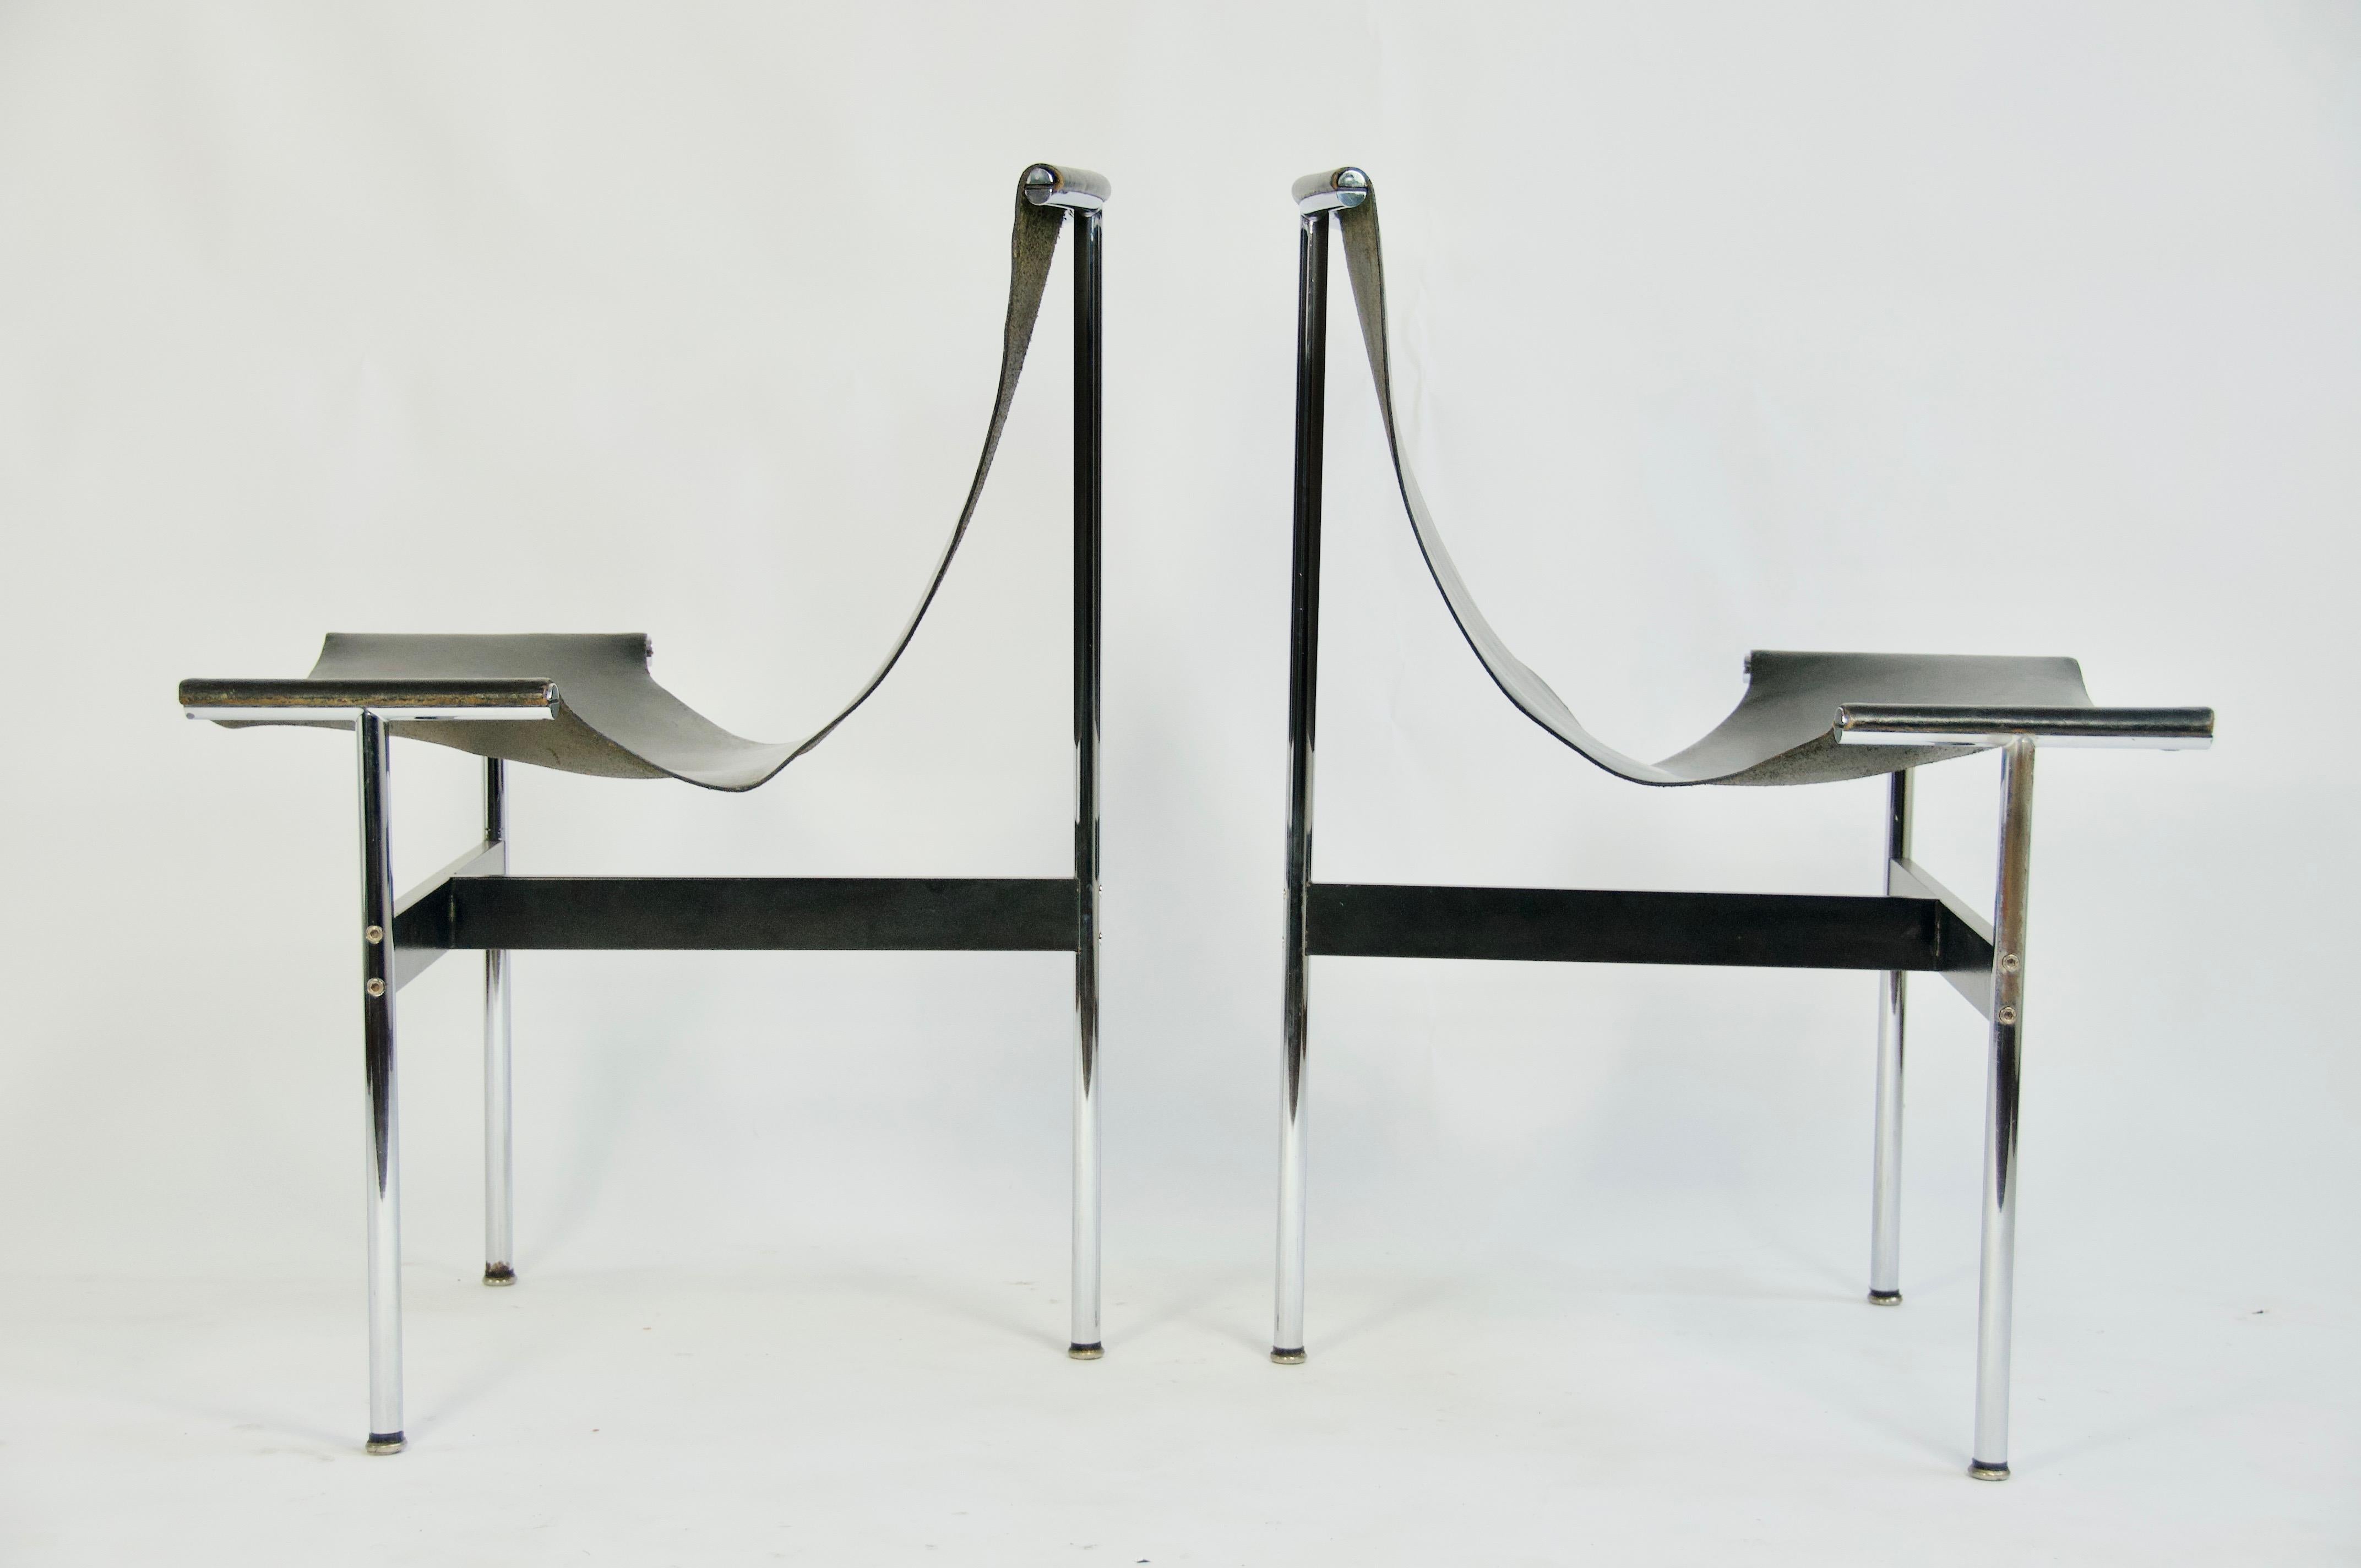 Pair T-chairs by William Katavolos Littell and Kelly.

This set of elegant three-legged chairs seems almost too delicate to sit in. But in fact these sensuous chairs are very strong. The chairs are curveous and sculptural and feature wonderful